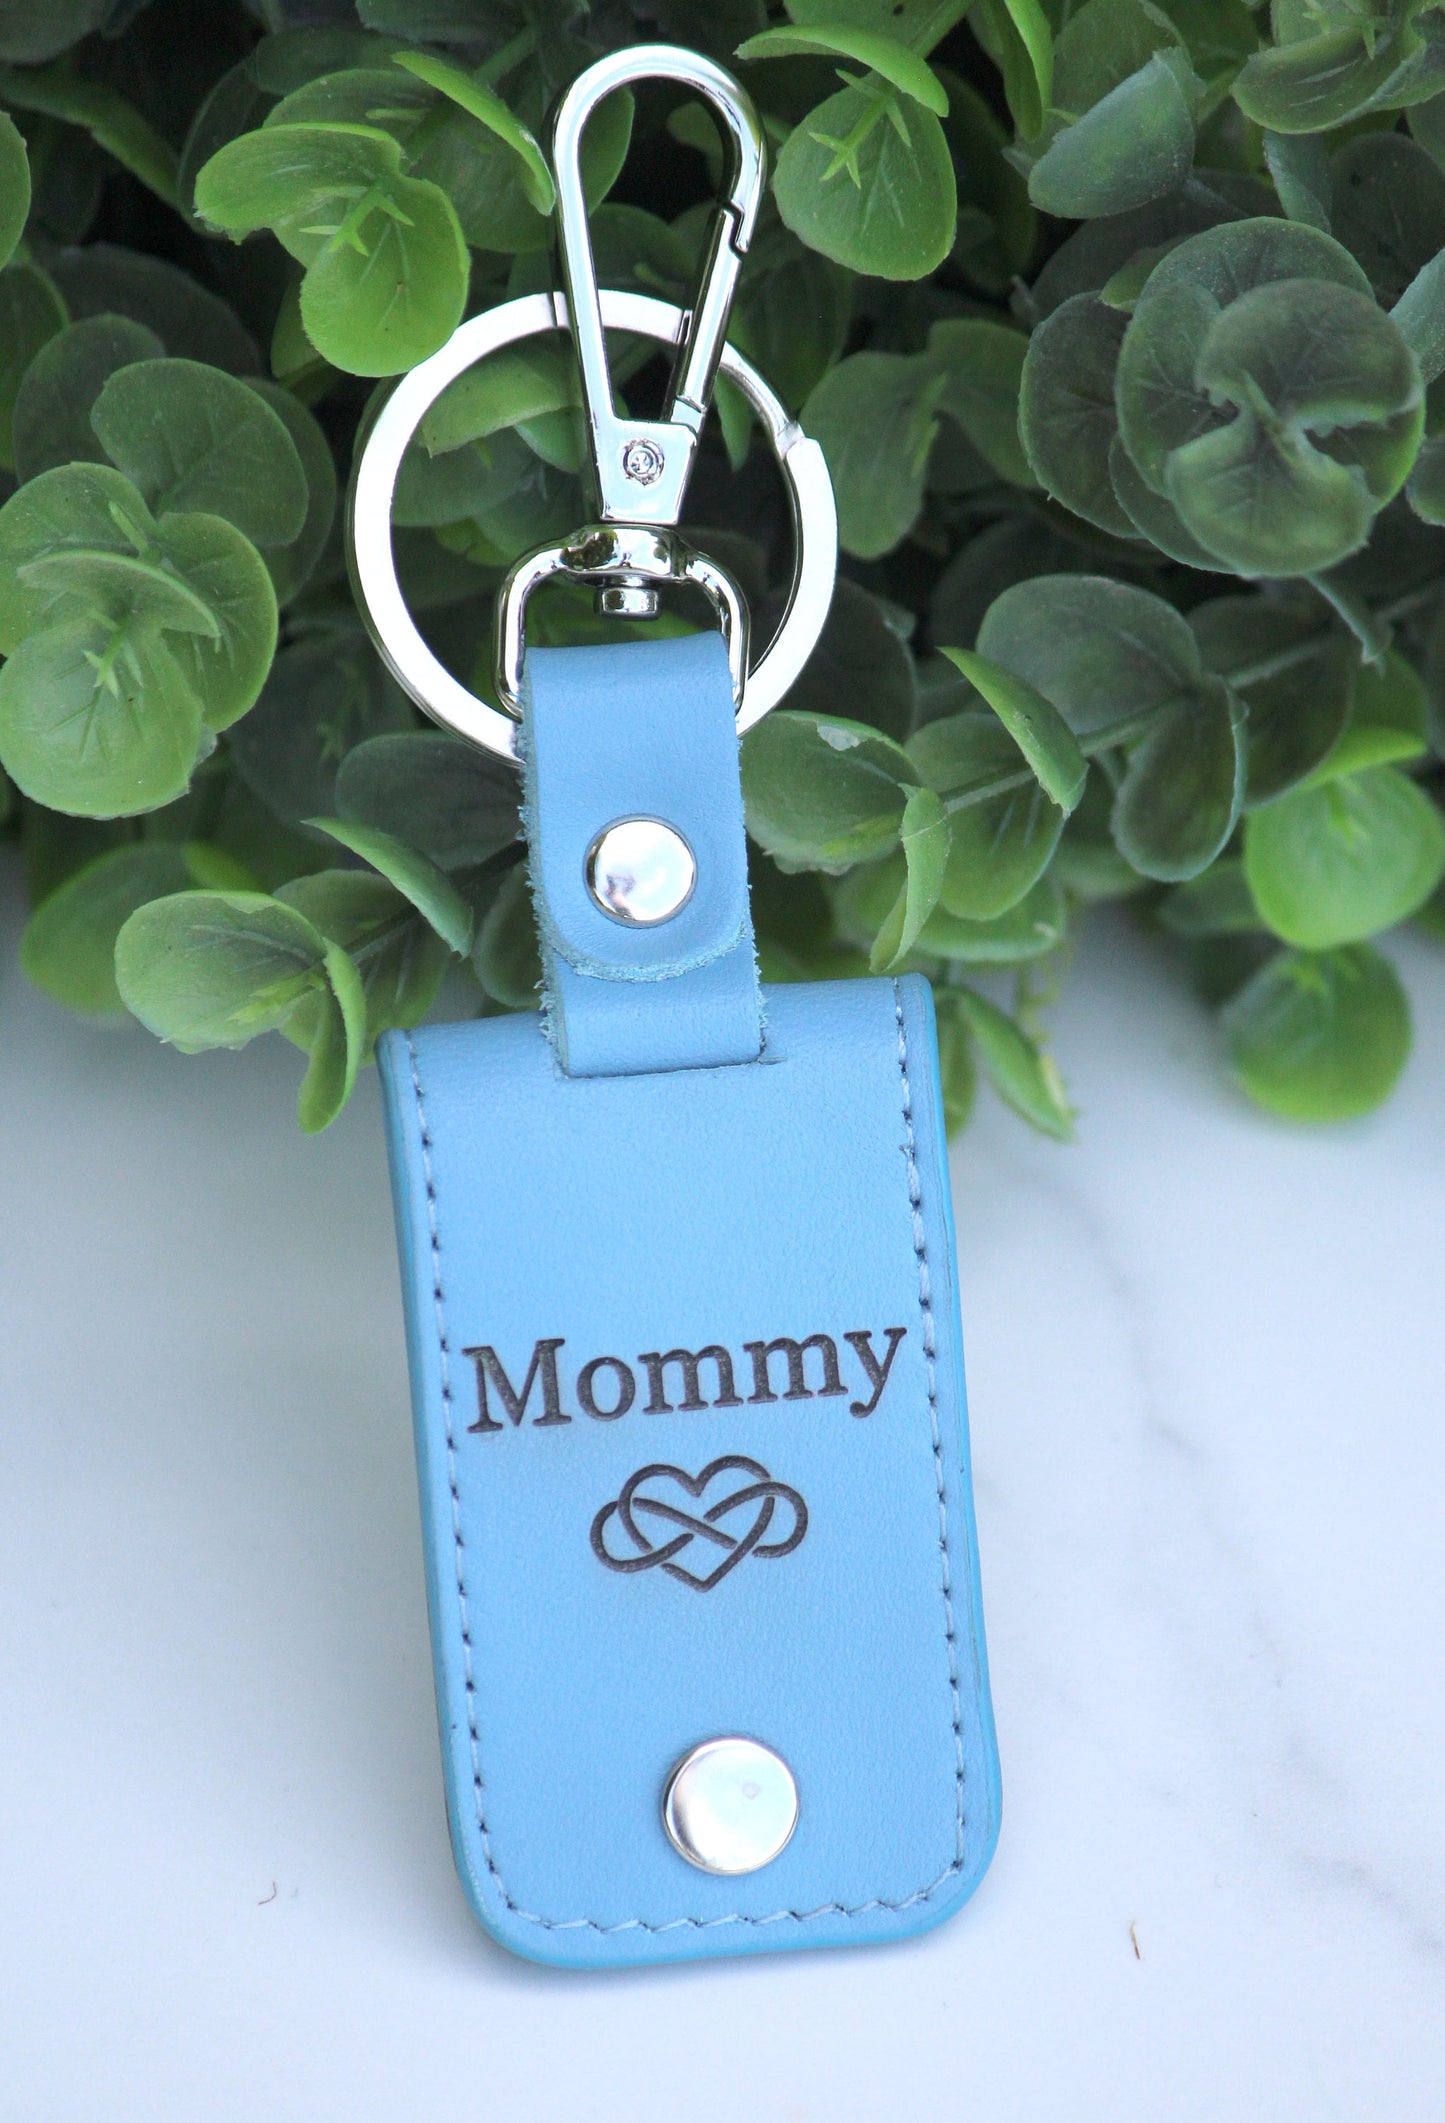 Mothers Day, Fathers Day, Personalized Leather Photo Keychain, Drive Safe, First Time Dad Mom Gift - Birthday, Anniversary, Memorial Gift